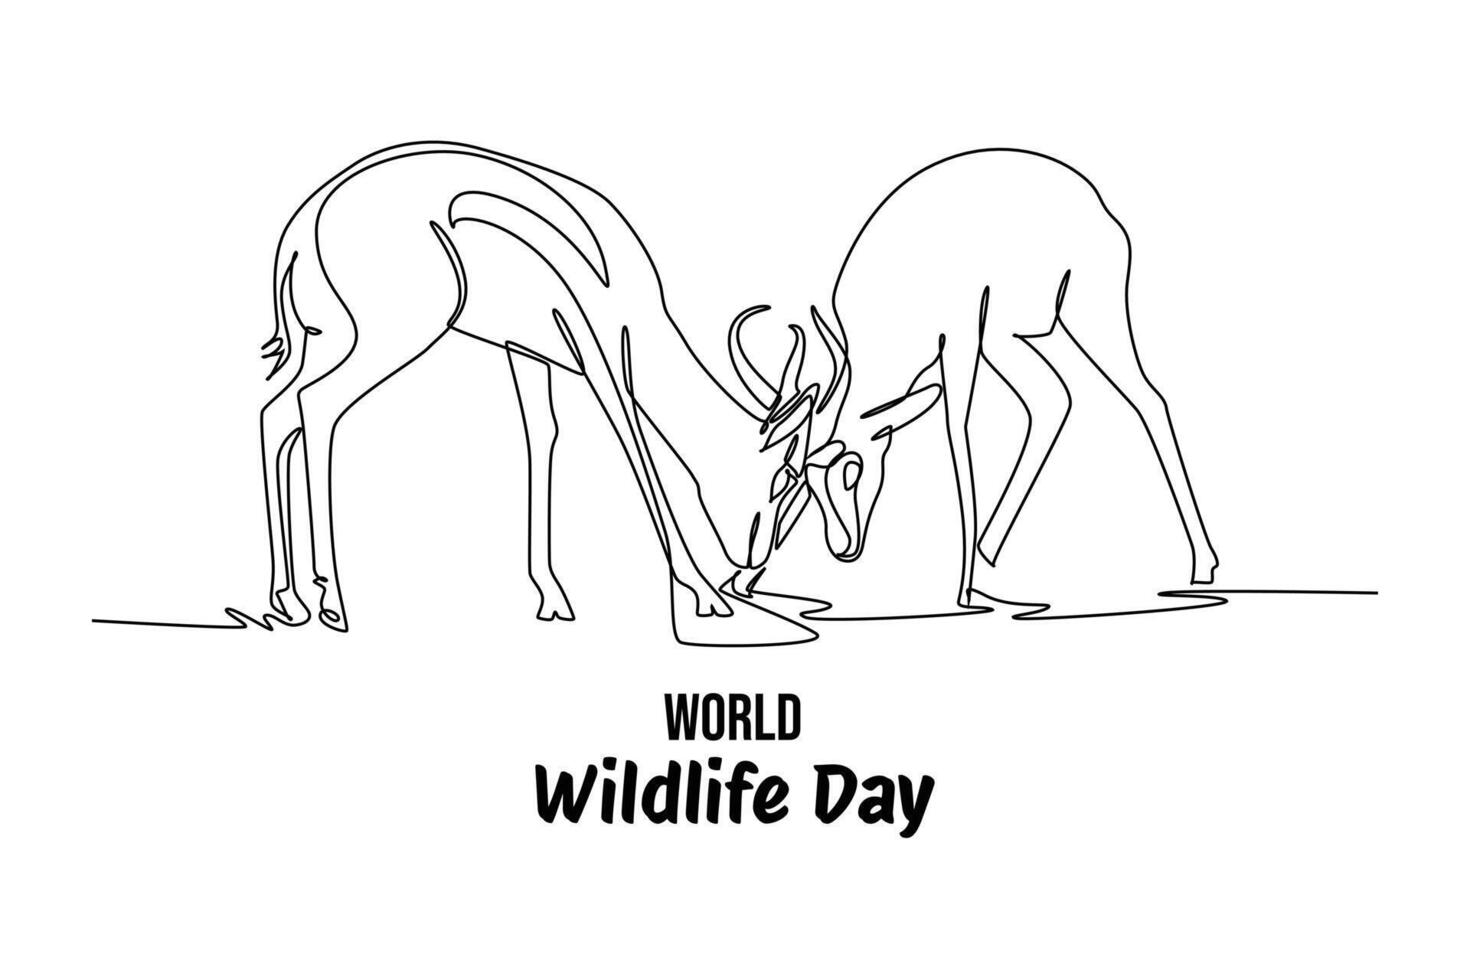 Continuous one line drawing world wildlife day concept. Doodle vector illustration.